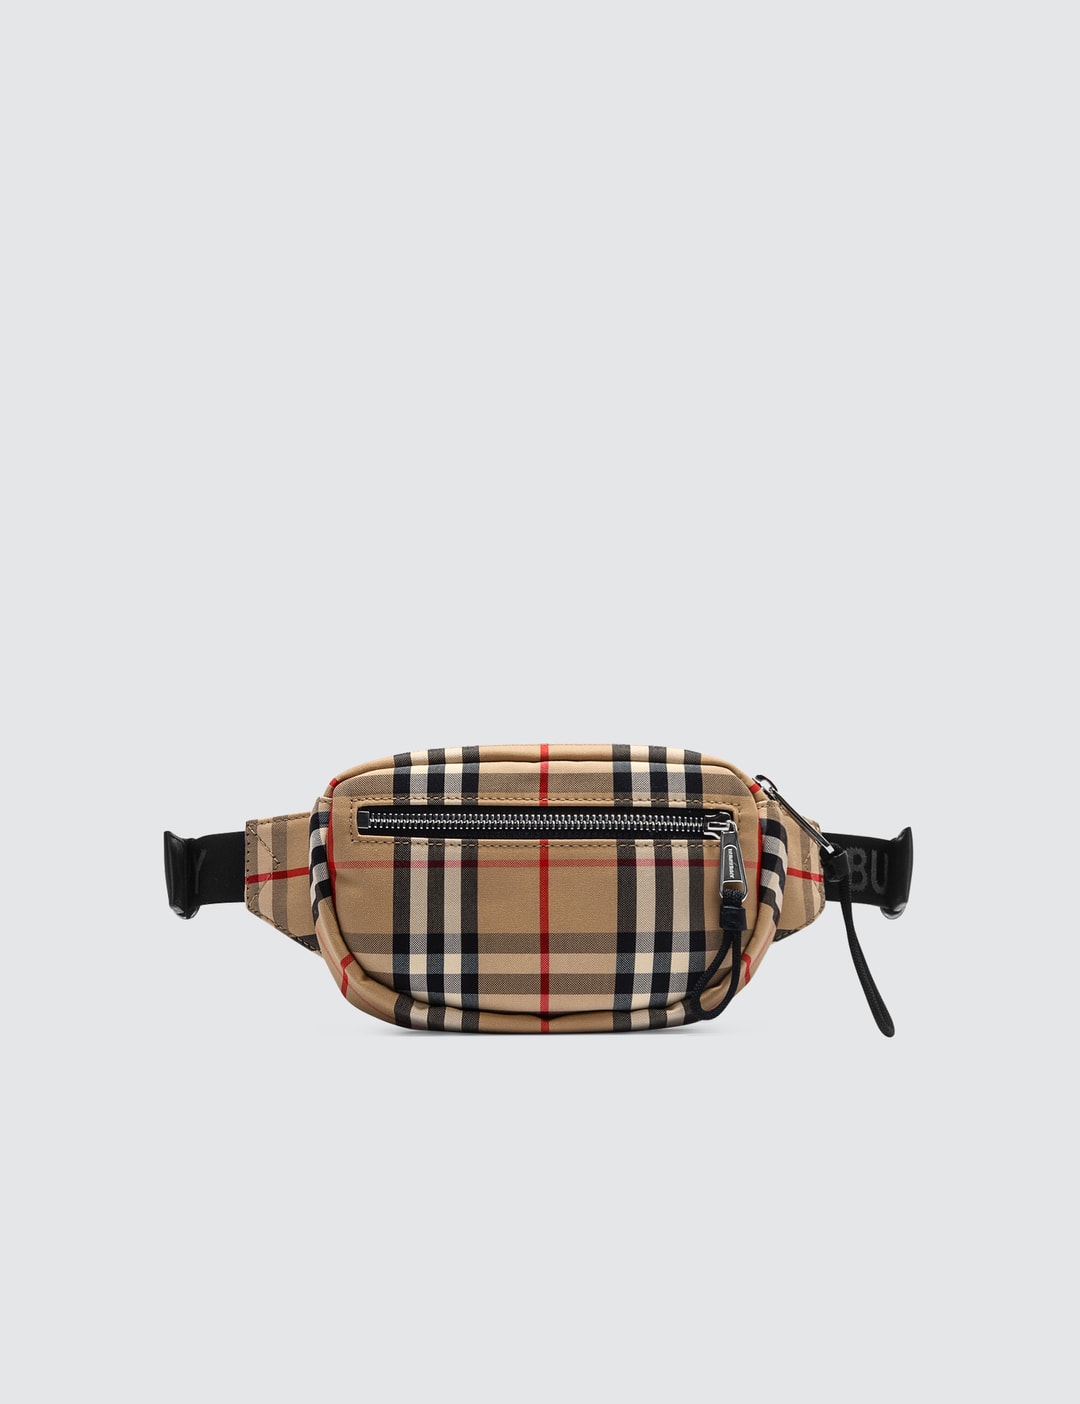 Burberry - Small Vintage Cannon Bum Bag | HBX - Curated Fashion and Lifestyle by Hypebeast